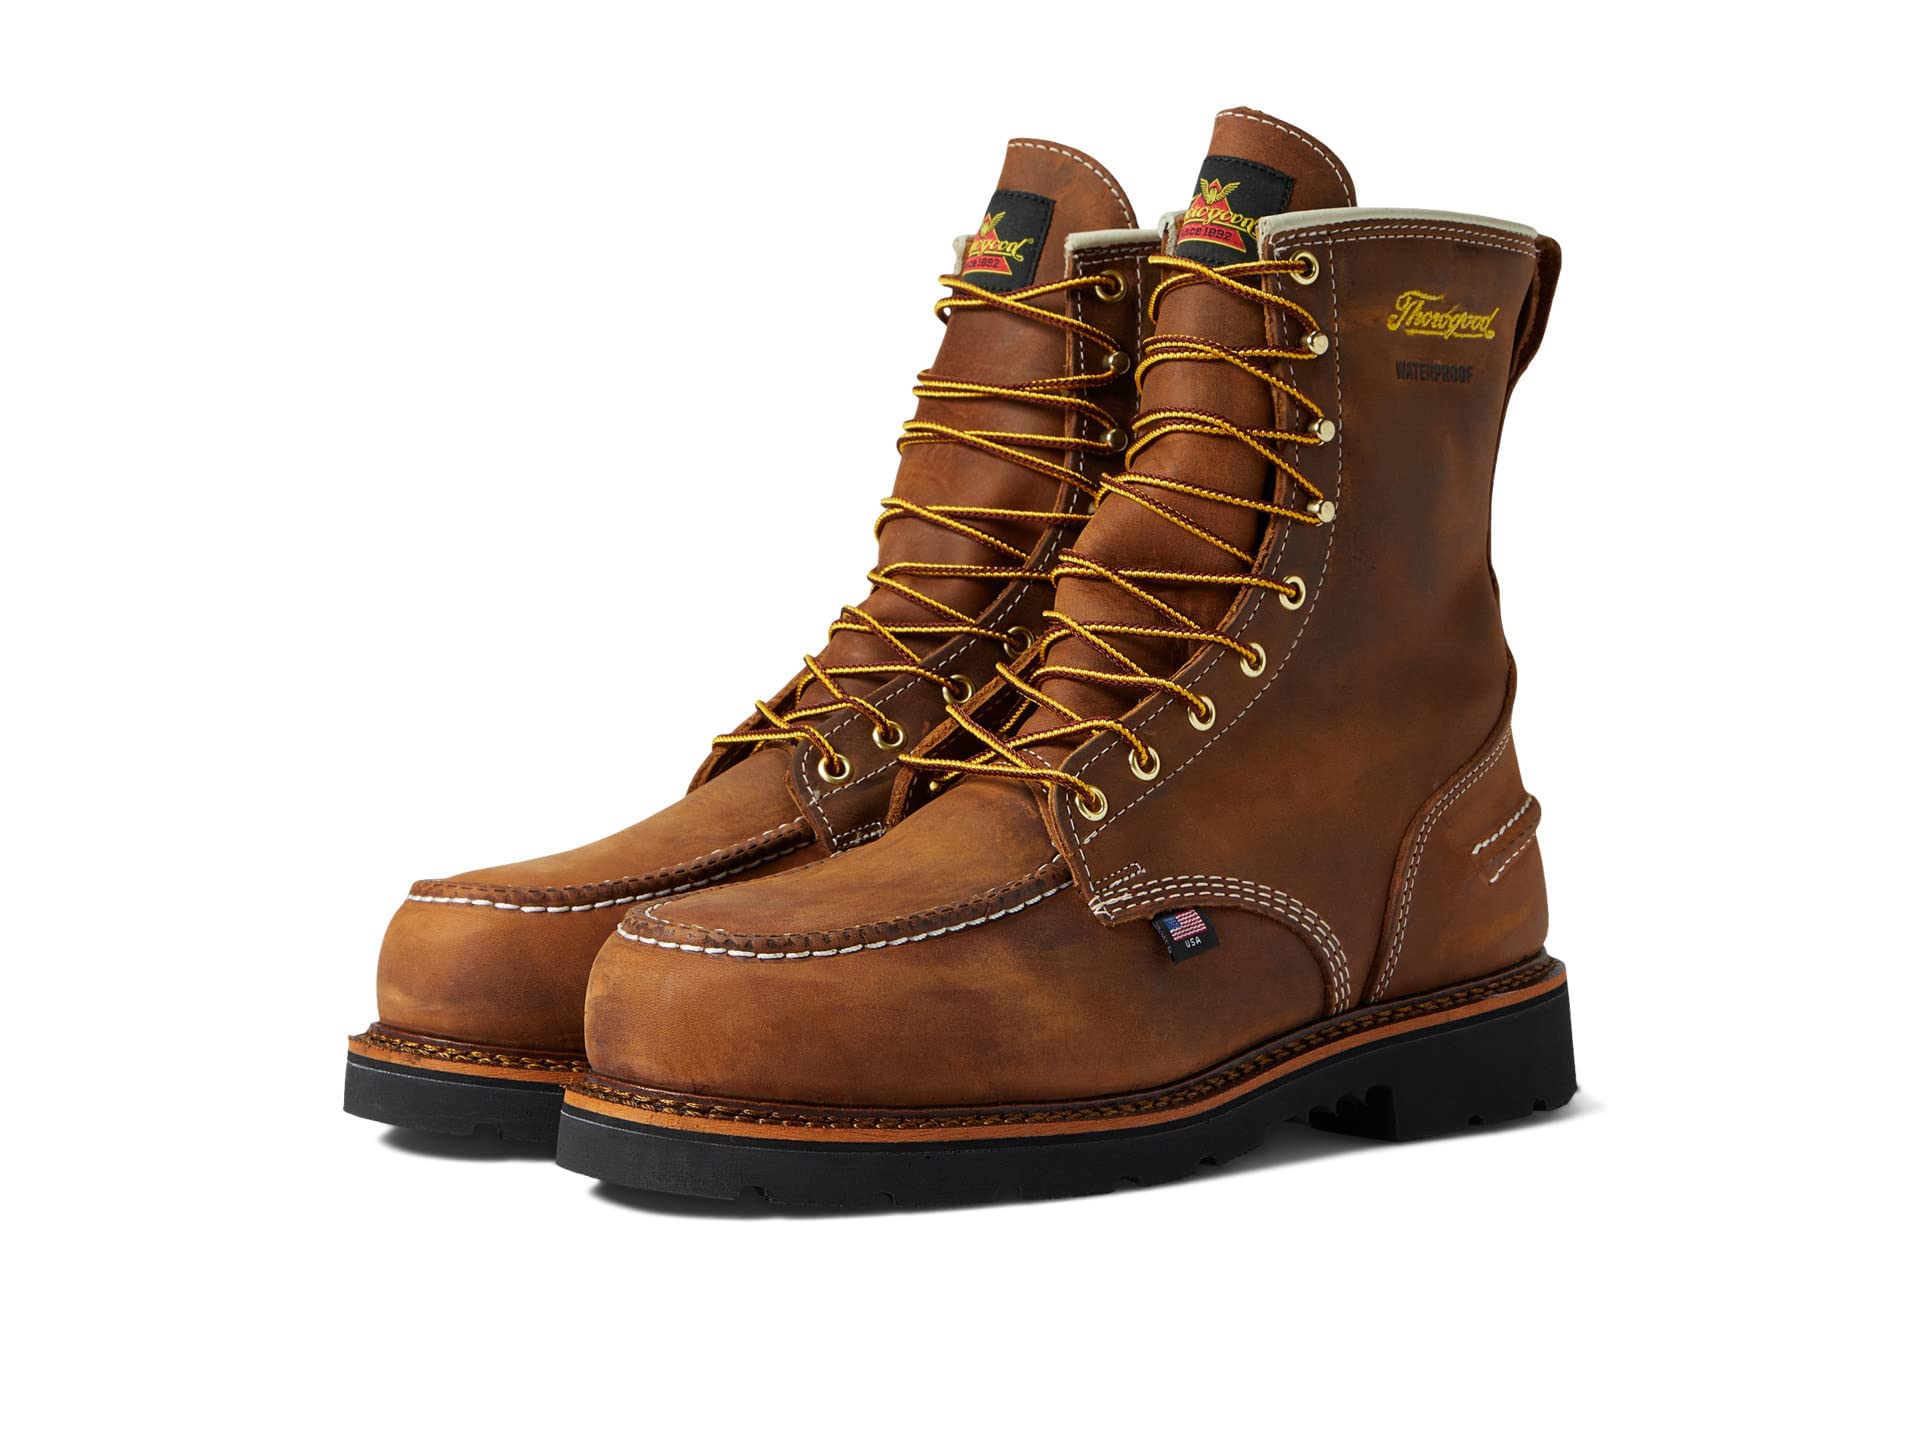 Thorogood 1957 Series 8” Waterproof Steel Toe Work Boots for Men - Full-Grain Leather with Moc Toe, Slip-Resistant Heel Outsole, and Comfort Insole; EH Rated